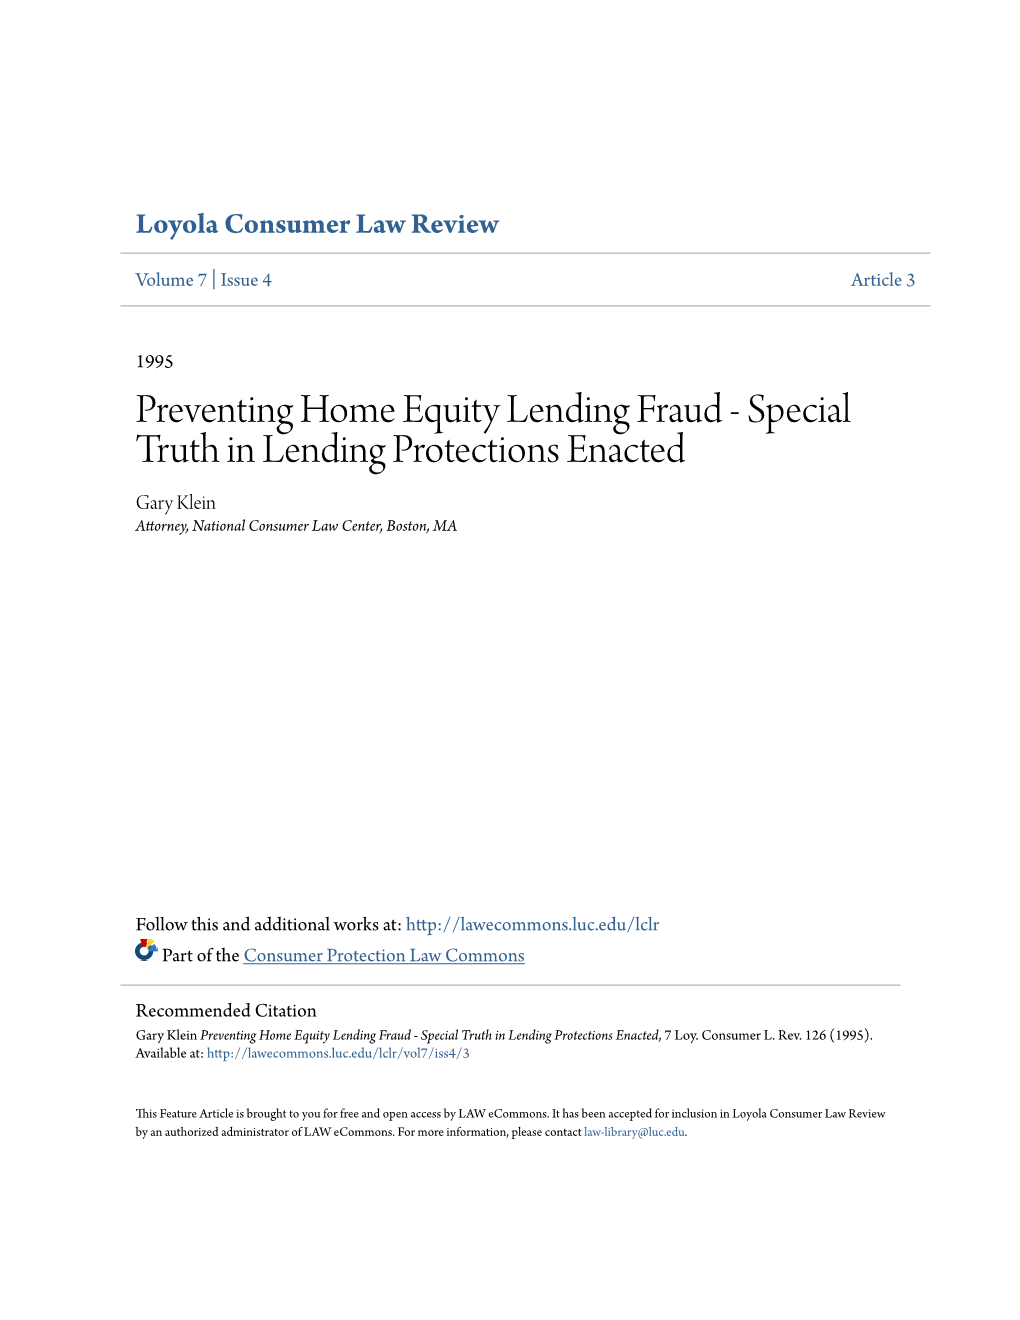 Preventing Home Equity Lending Fraud - Special Truth in Lending Protections Enacted Gary Klein Attorney, National Consumer Law Center, Boston, MA